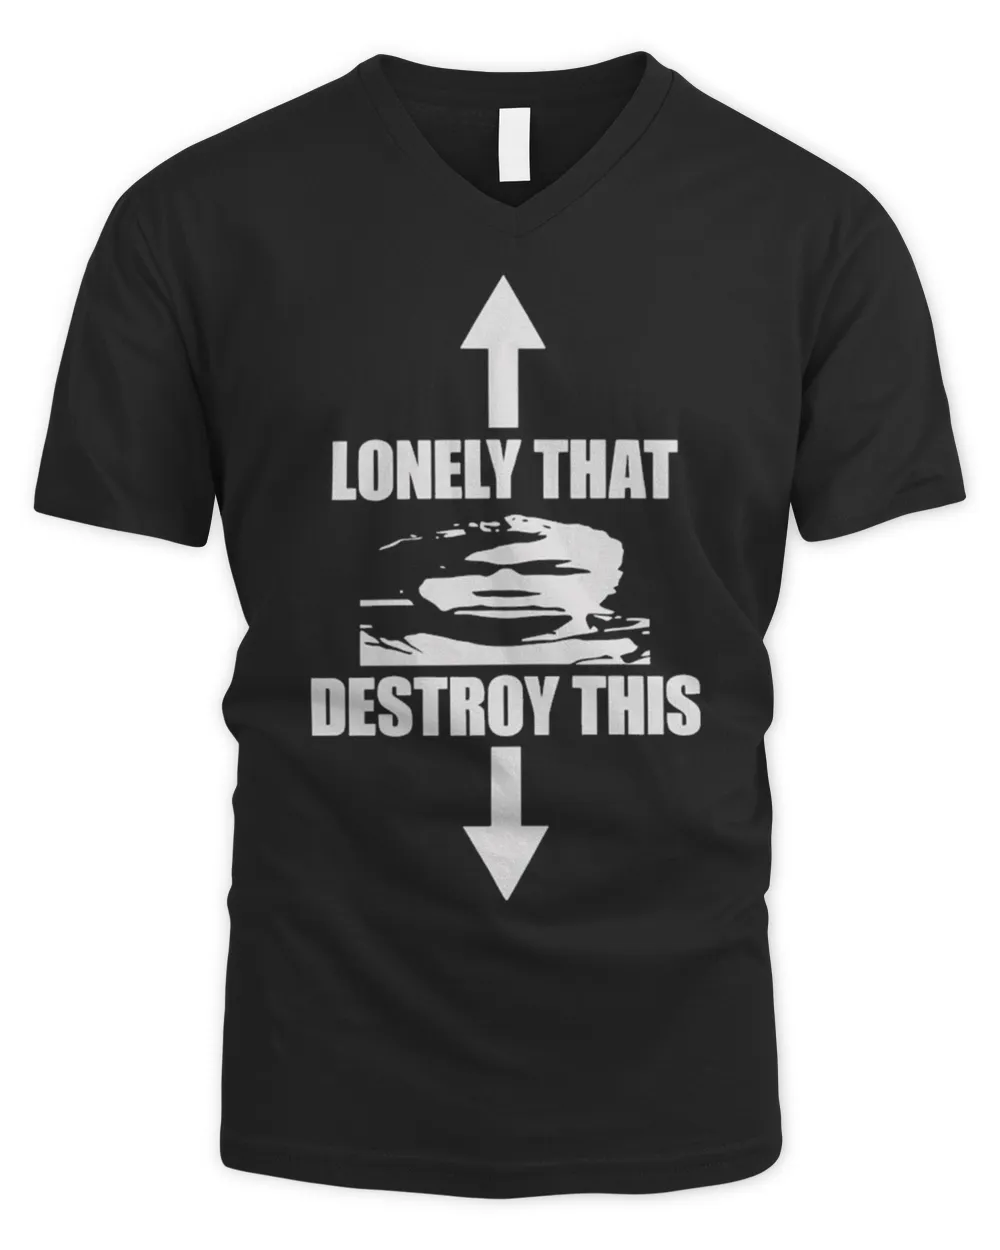 Lonely that destroy this shirt